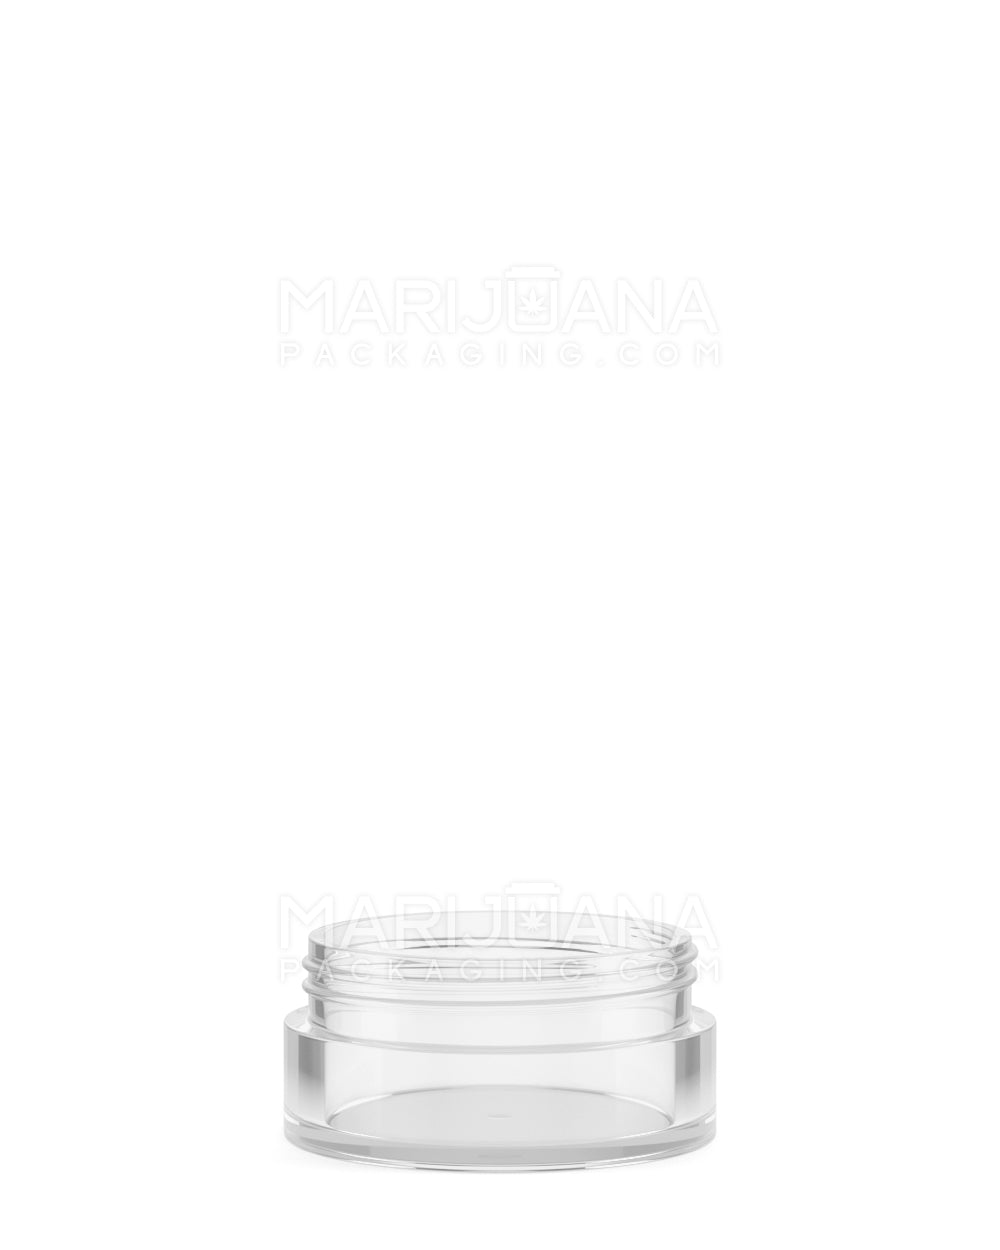 Clear Concentrate Containers w/ Screw Top Cap | 7mL - Acrylic - 200 Count - 4